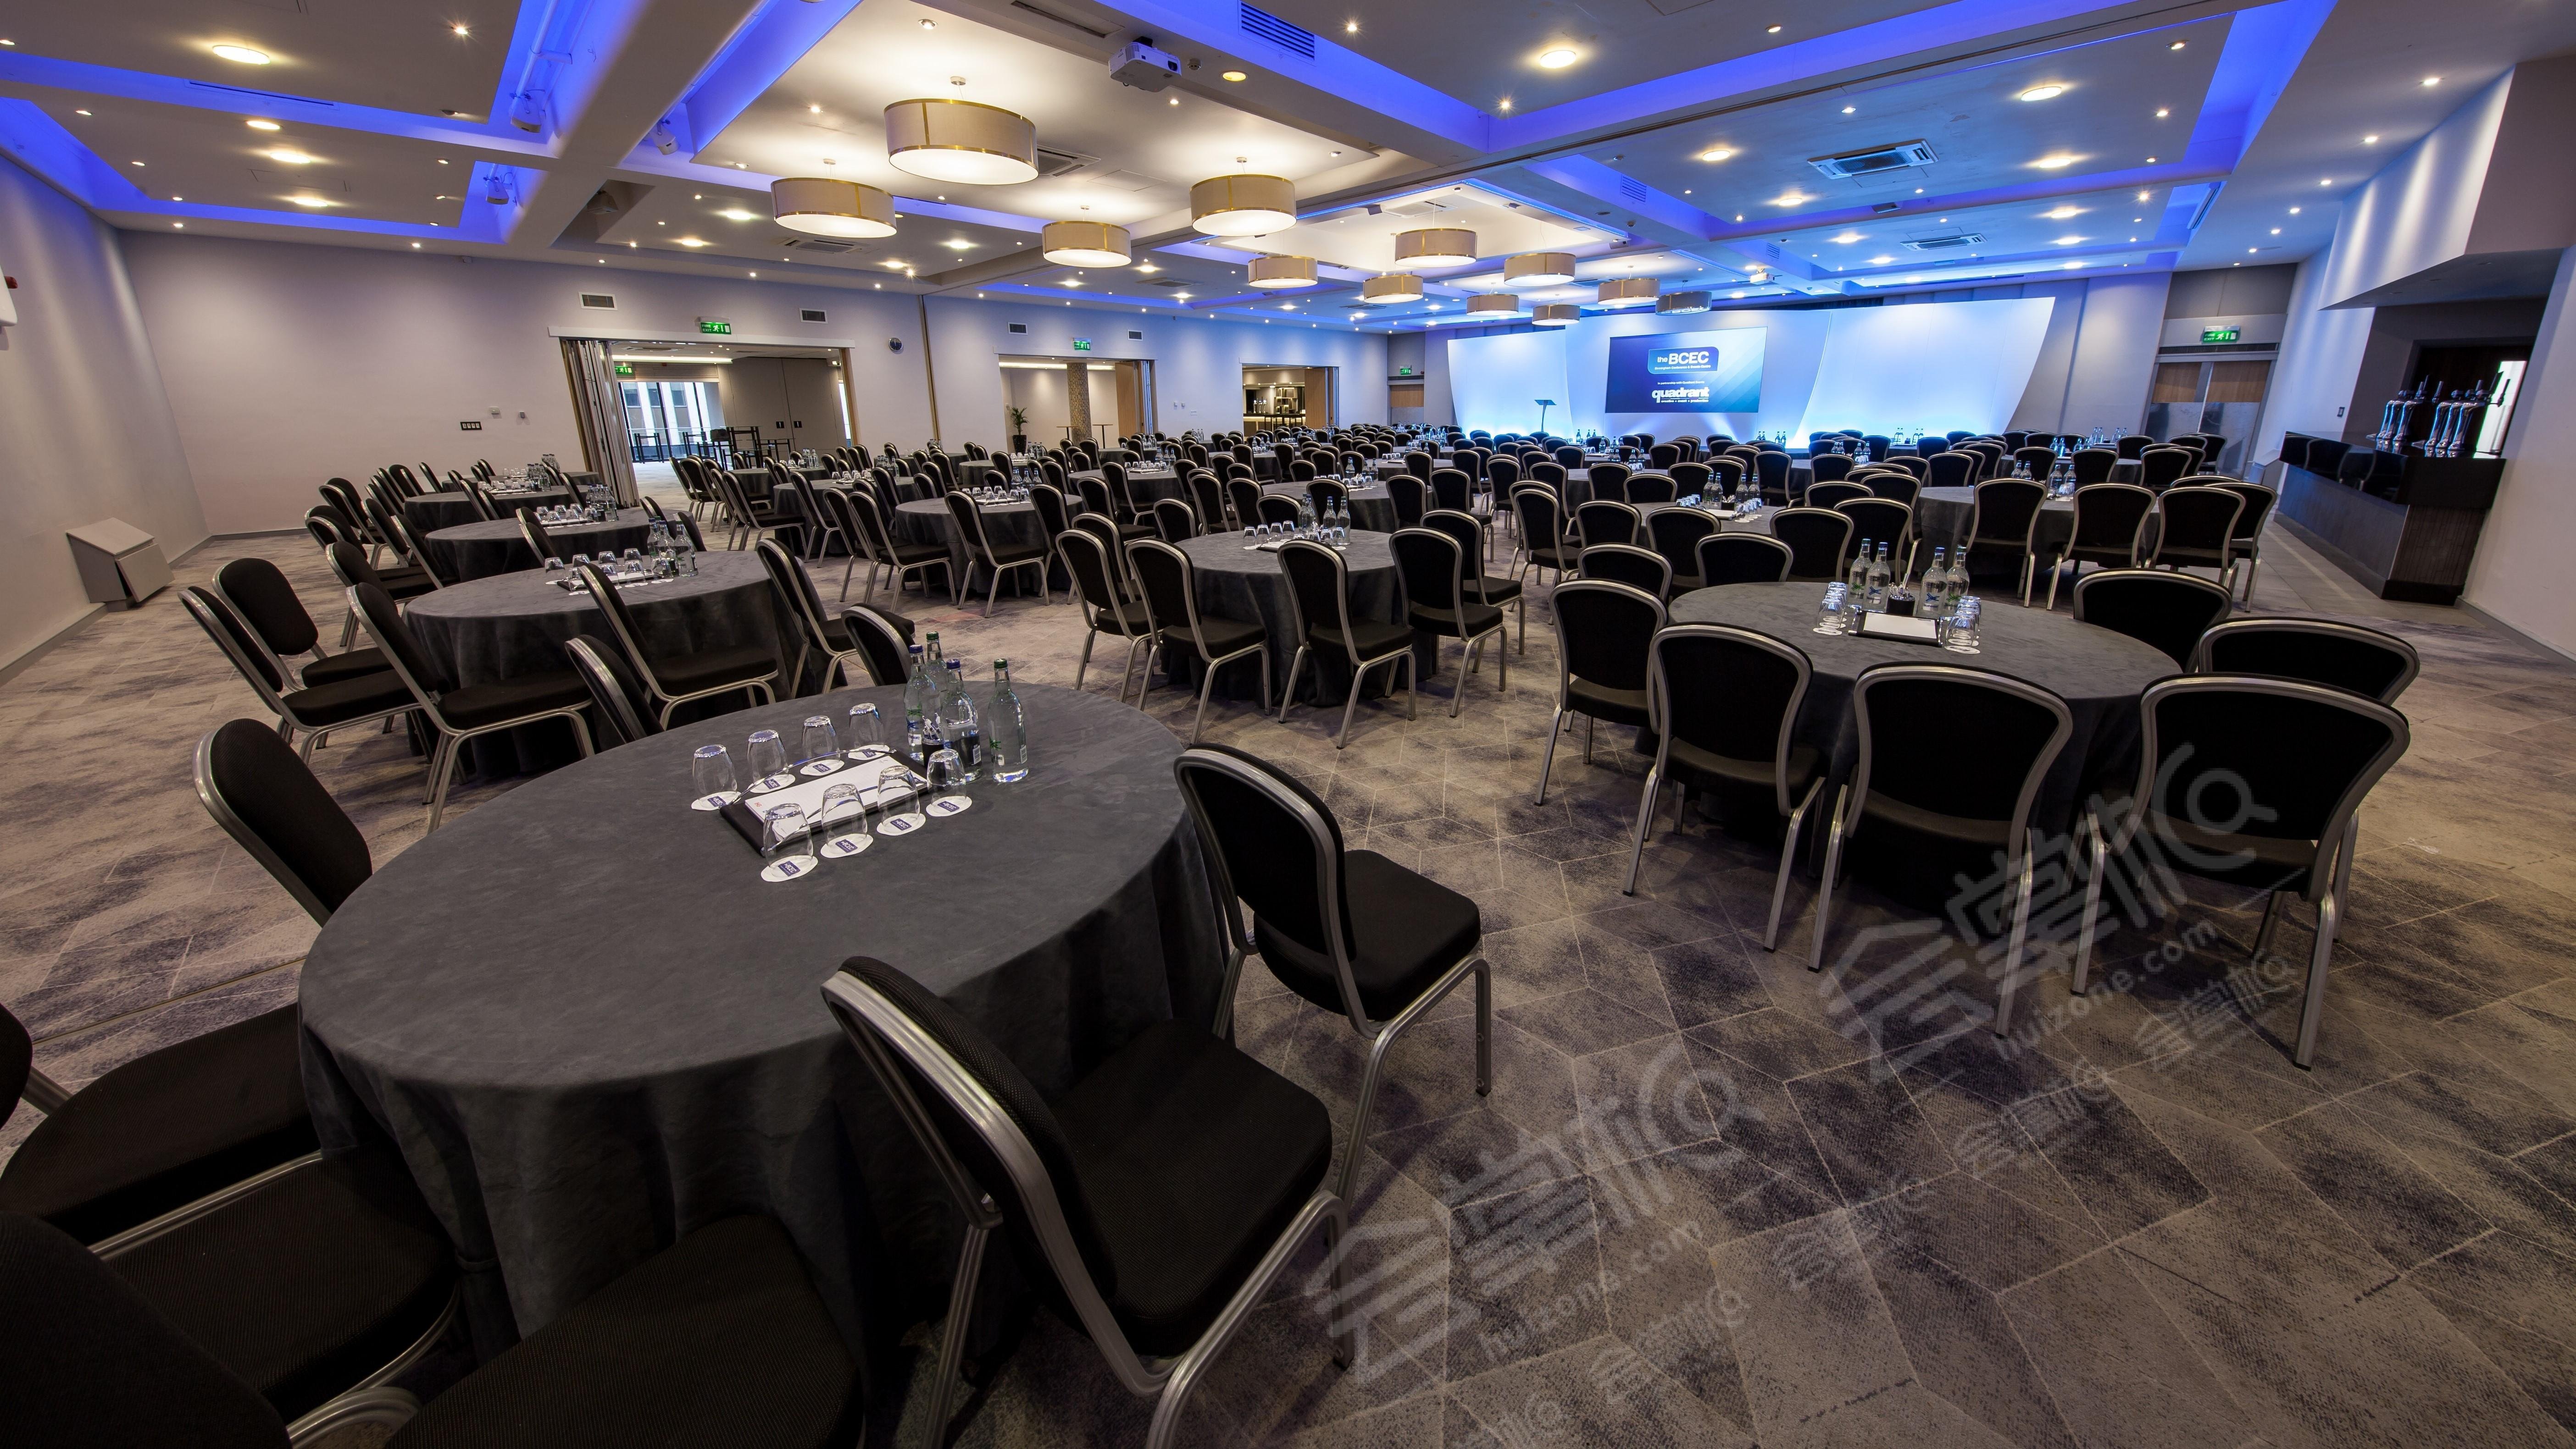 The Birmingham Conference and Events Centre at the Holiday Inn Birmingham City Centre